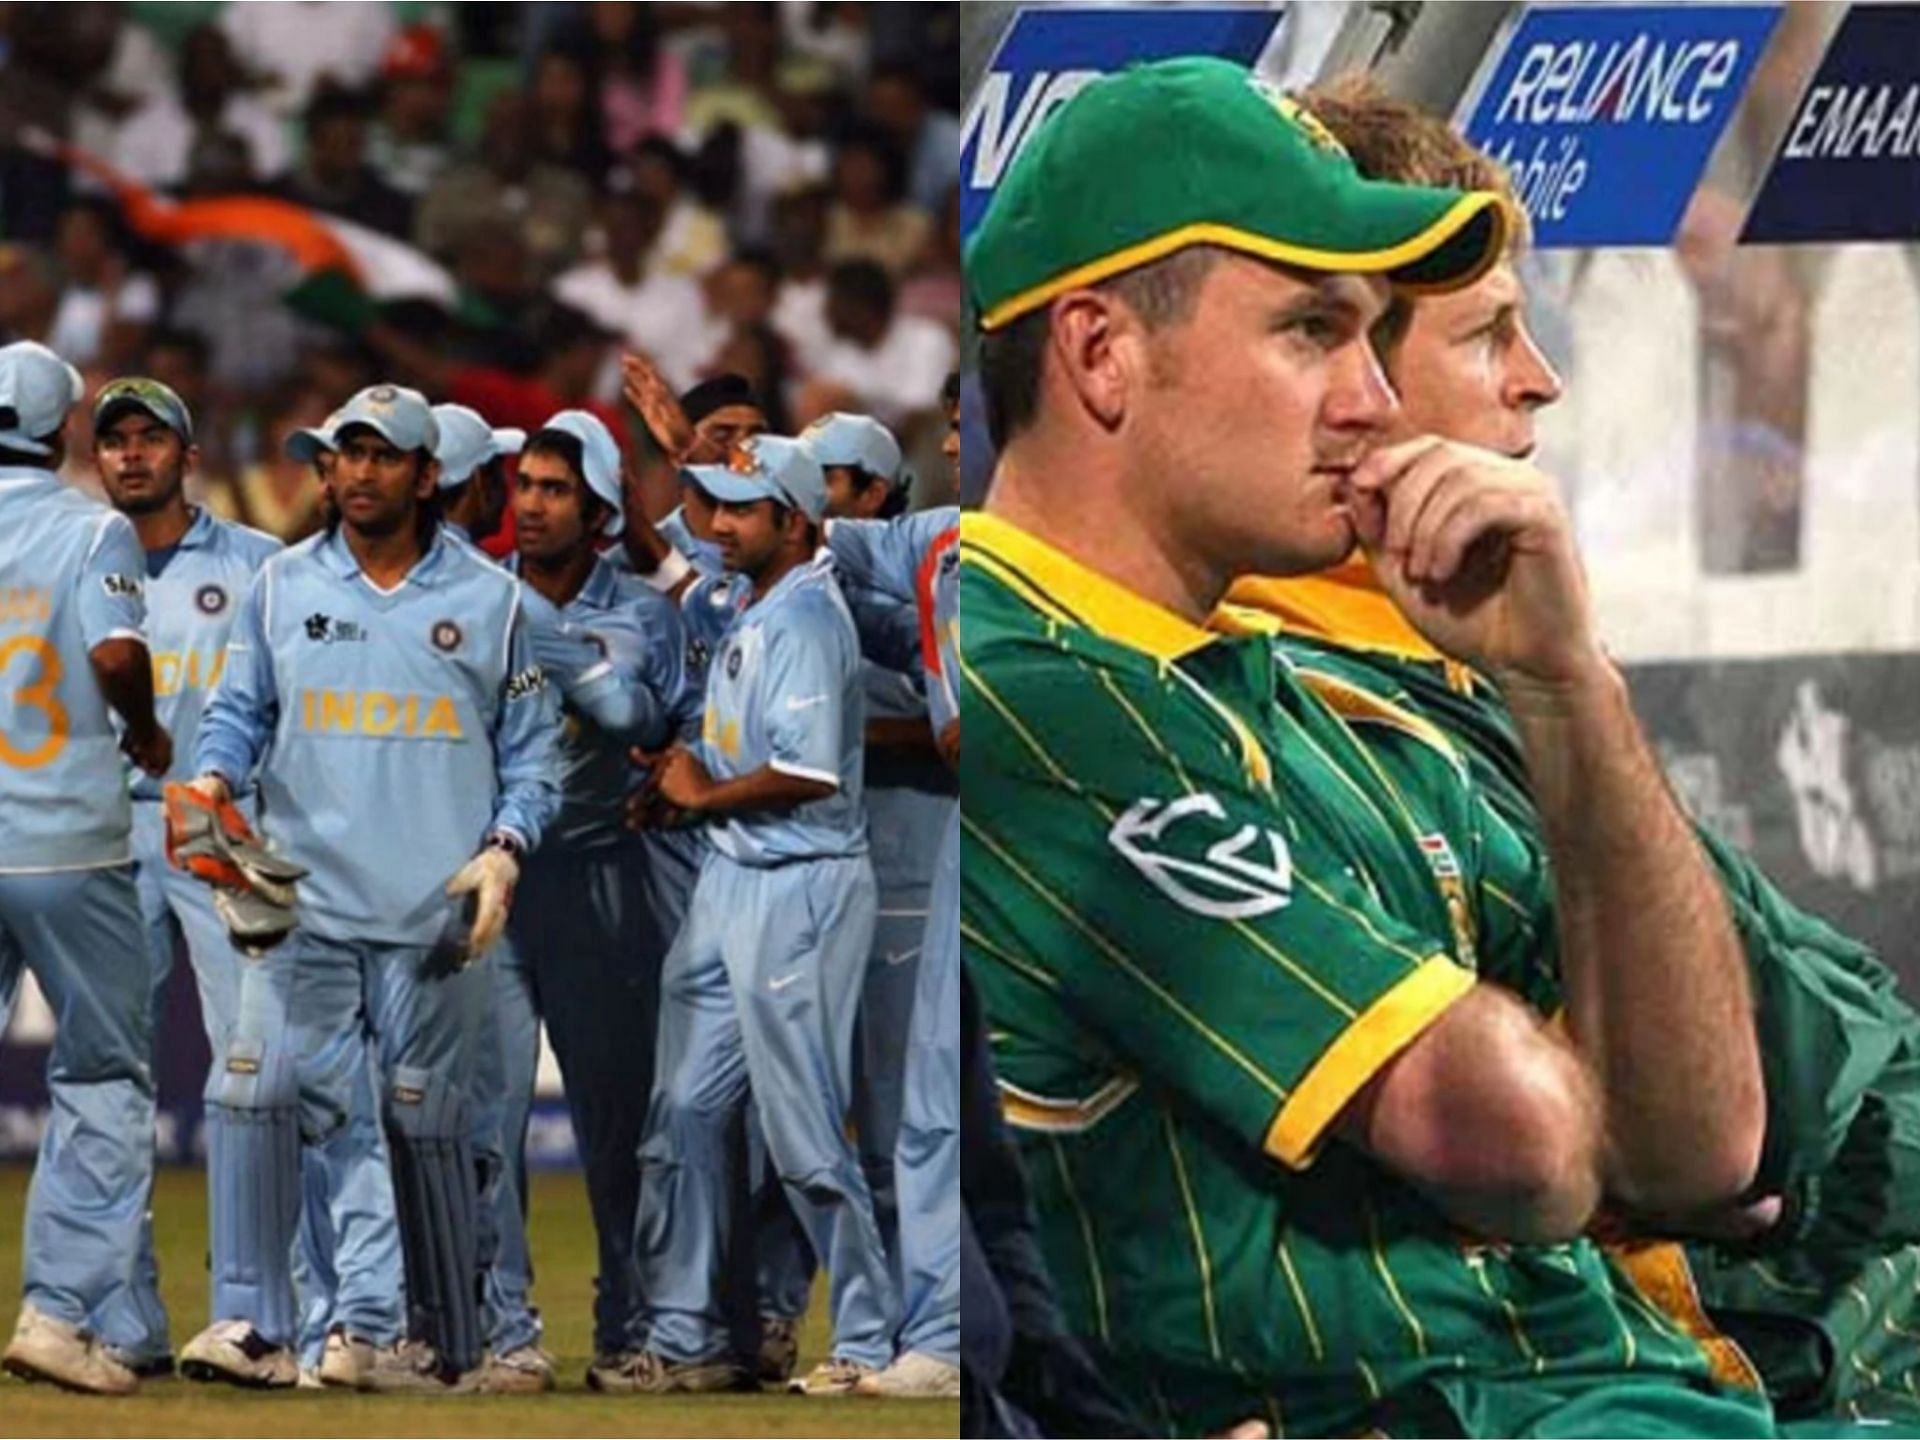 India played their last T20I against South Africa in Durban in 2007 [Getty Images]